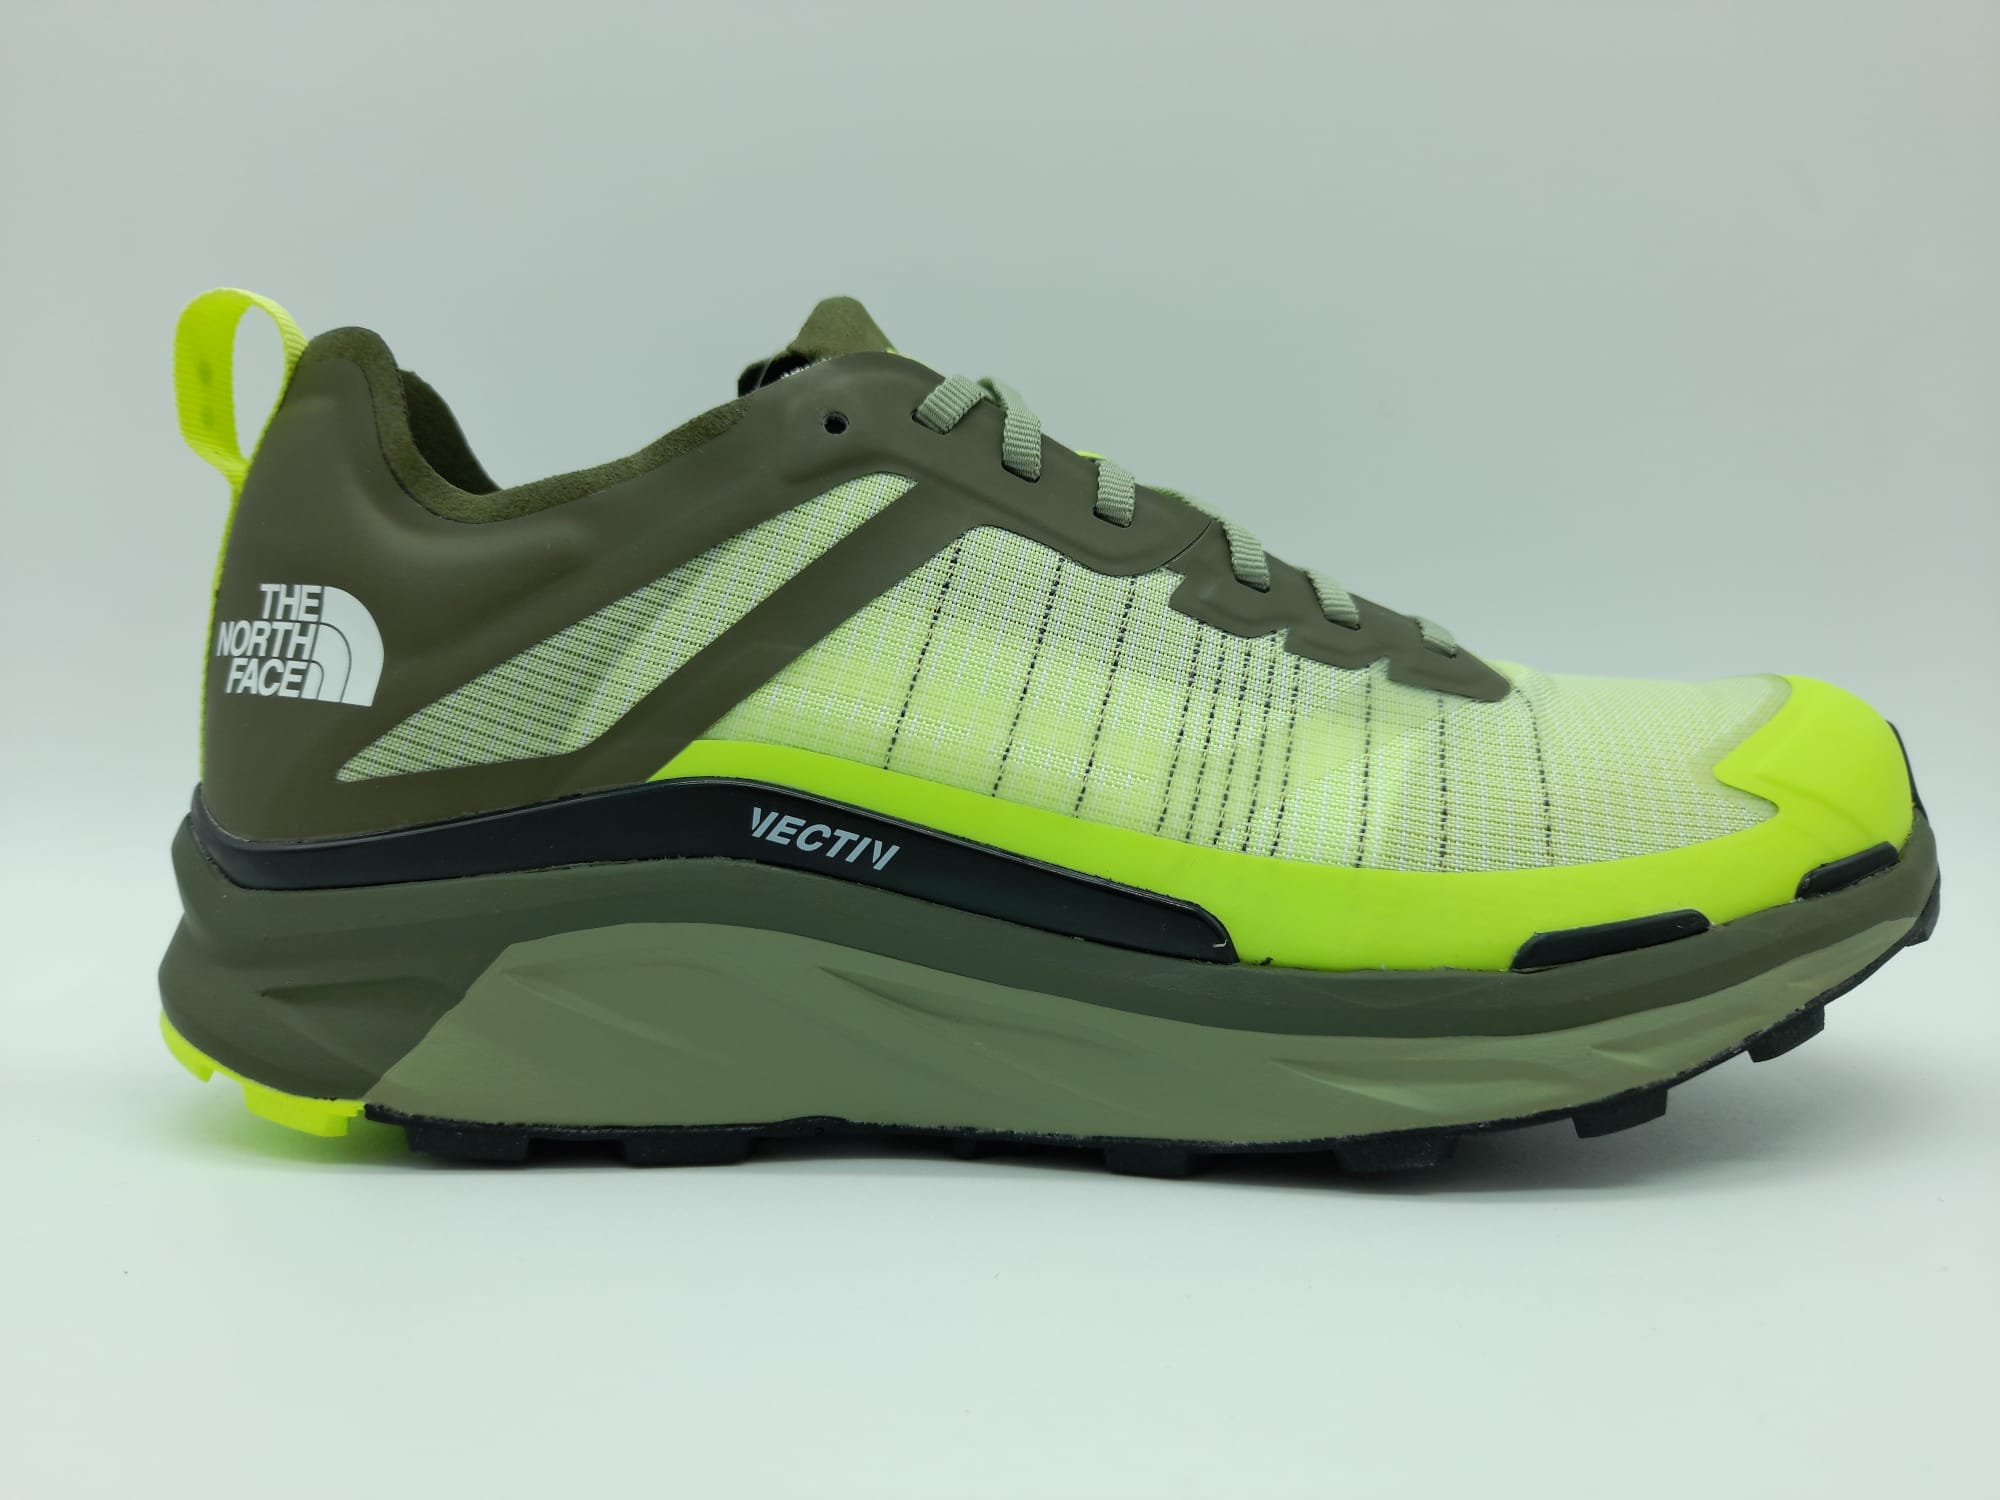 THE NORTH FACE VECTIV INFINITE - RiosRunning